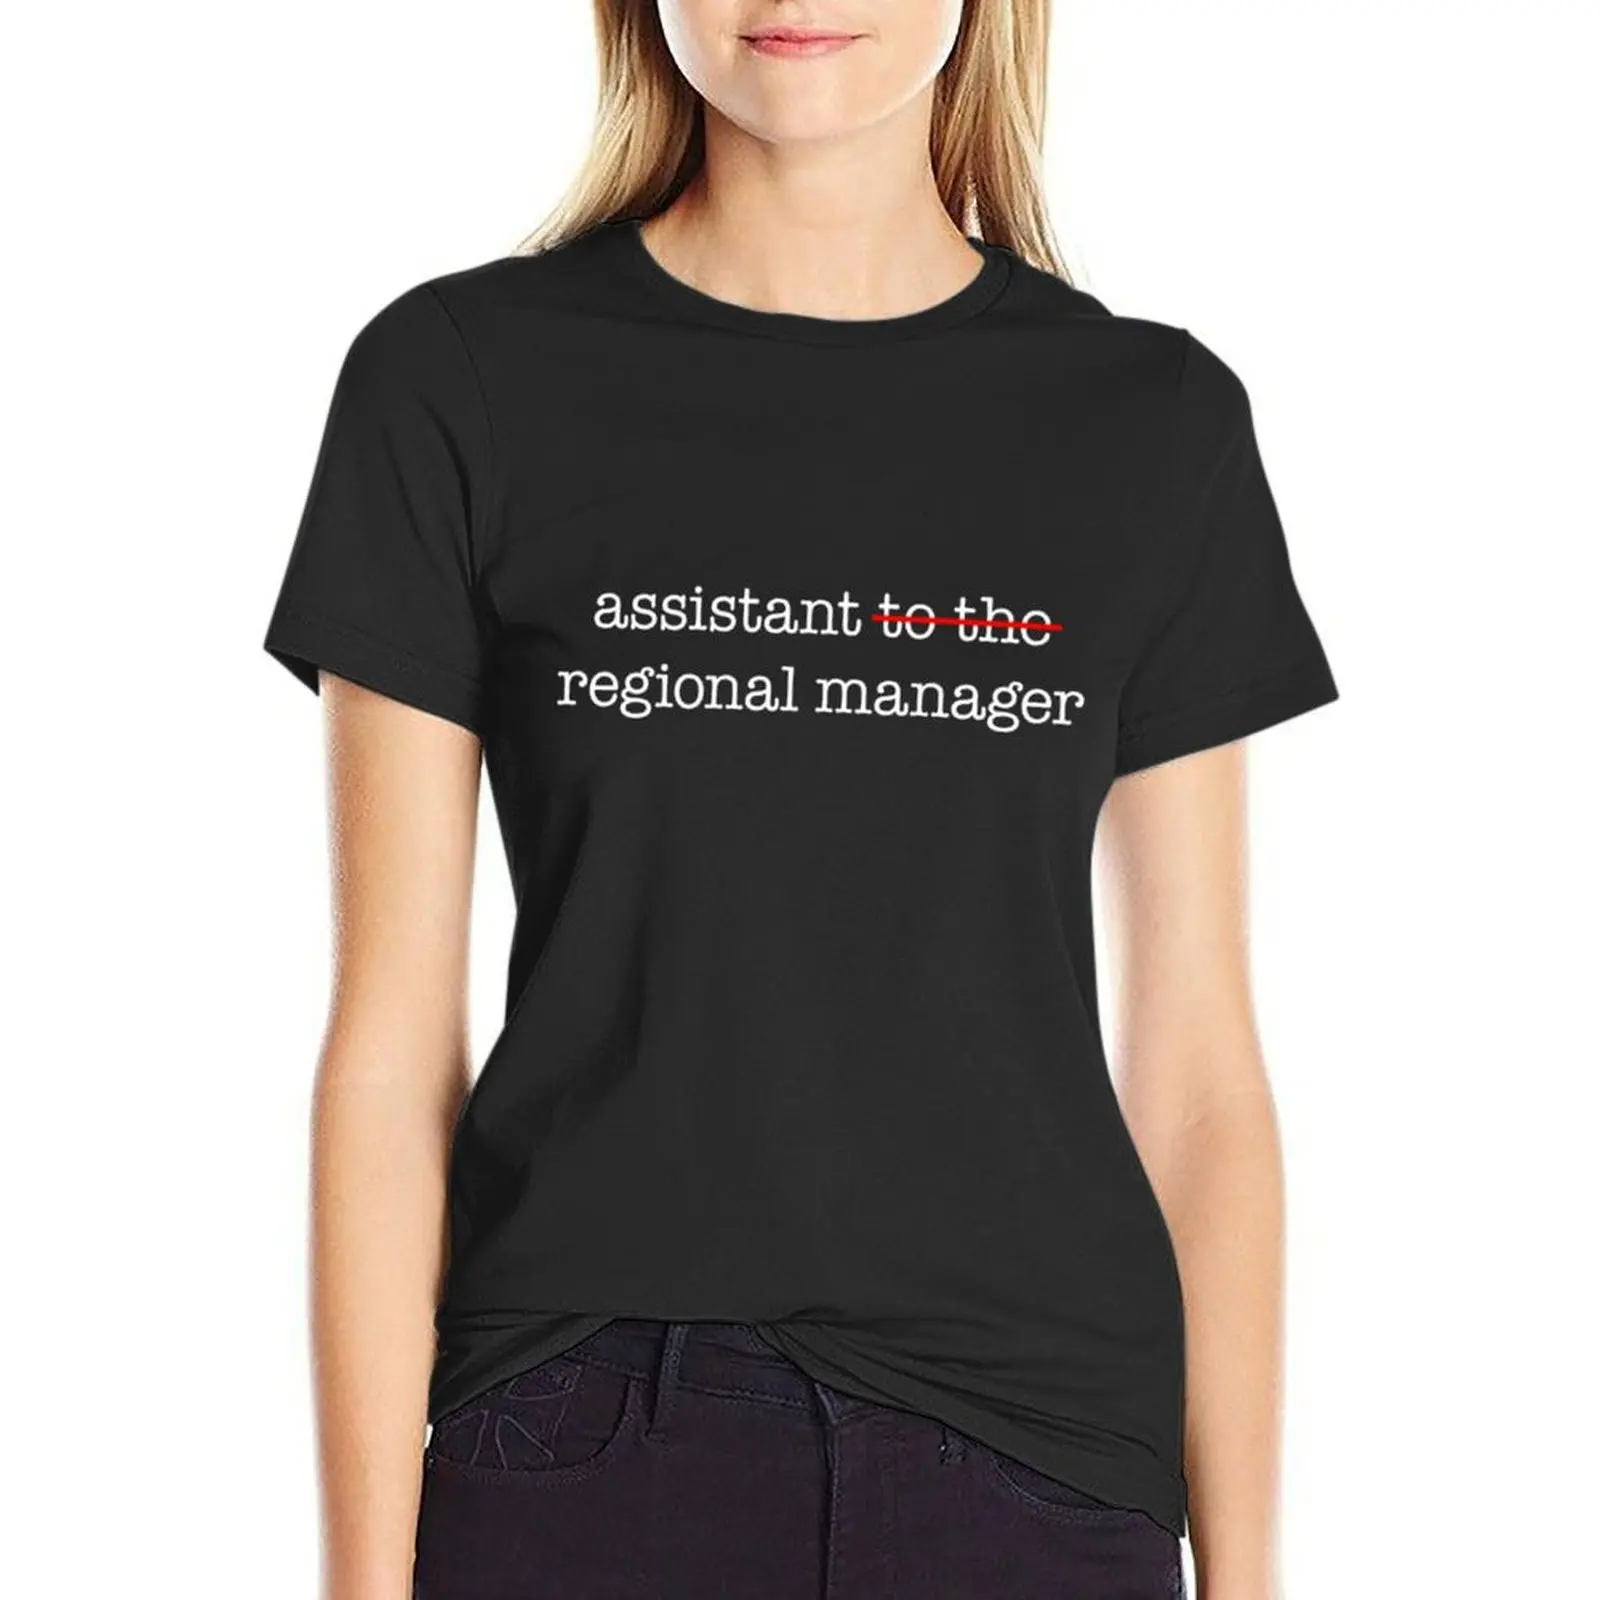 

The Office - Assistant to the Regional Manager T-shirt anime clothes summer tops t-shirt dress for Women graphic